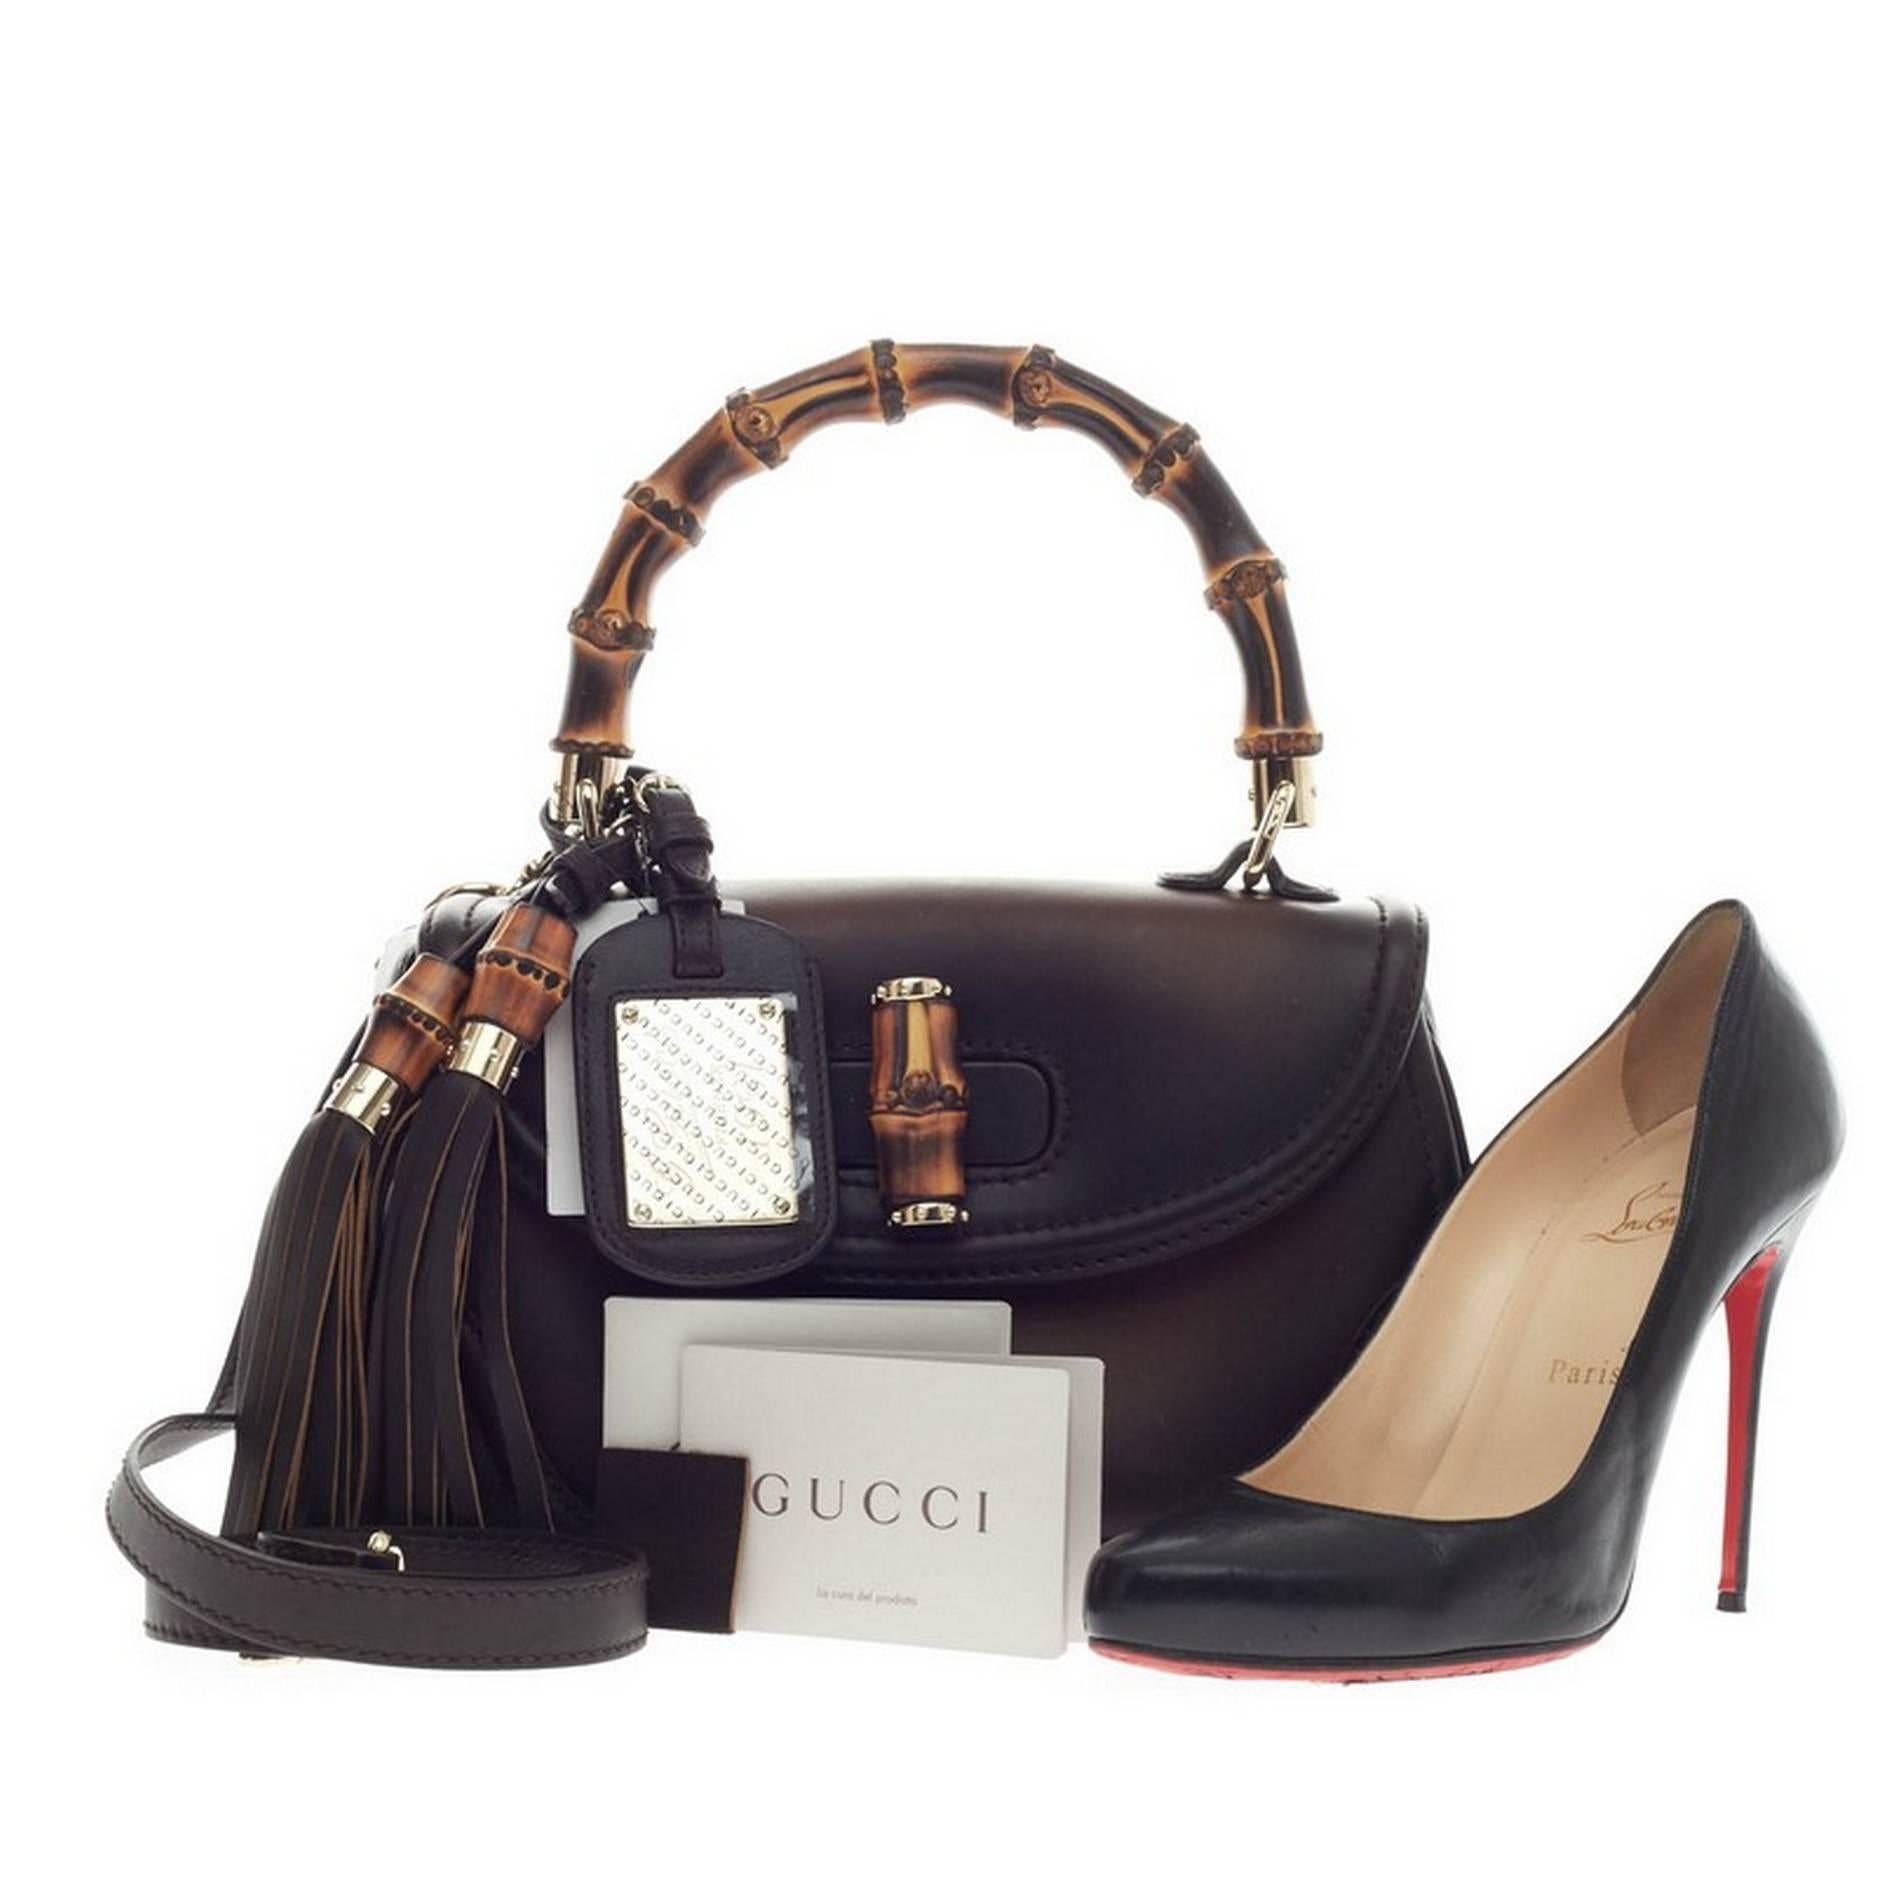 This authentic Gucci New Bamboo 1921 Top Handle Leather Medium is unmistakably a classic Gucci design created in 2011 for Gucci's 90th Anniversary. Hand-crafted shaded dark brown leather, this reimagined iconic bag features a bamboo top handle,